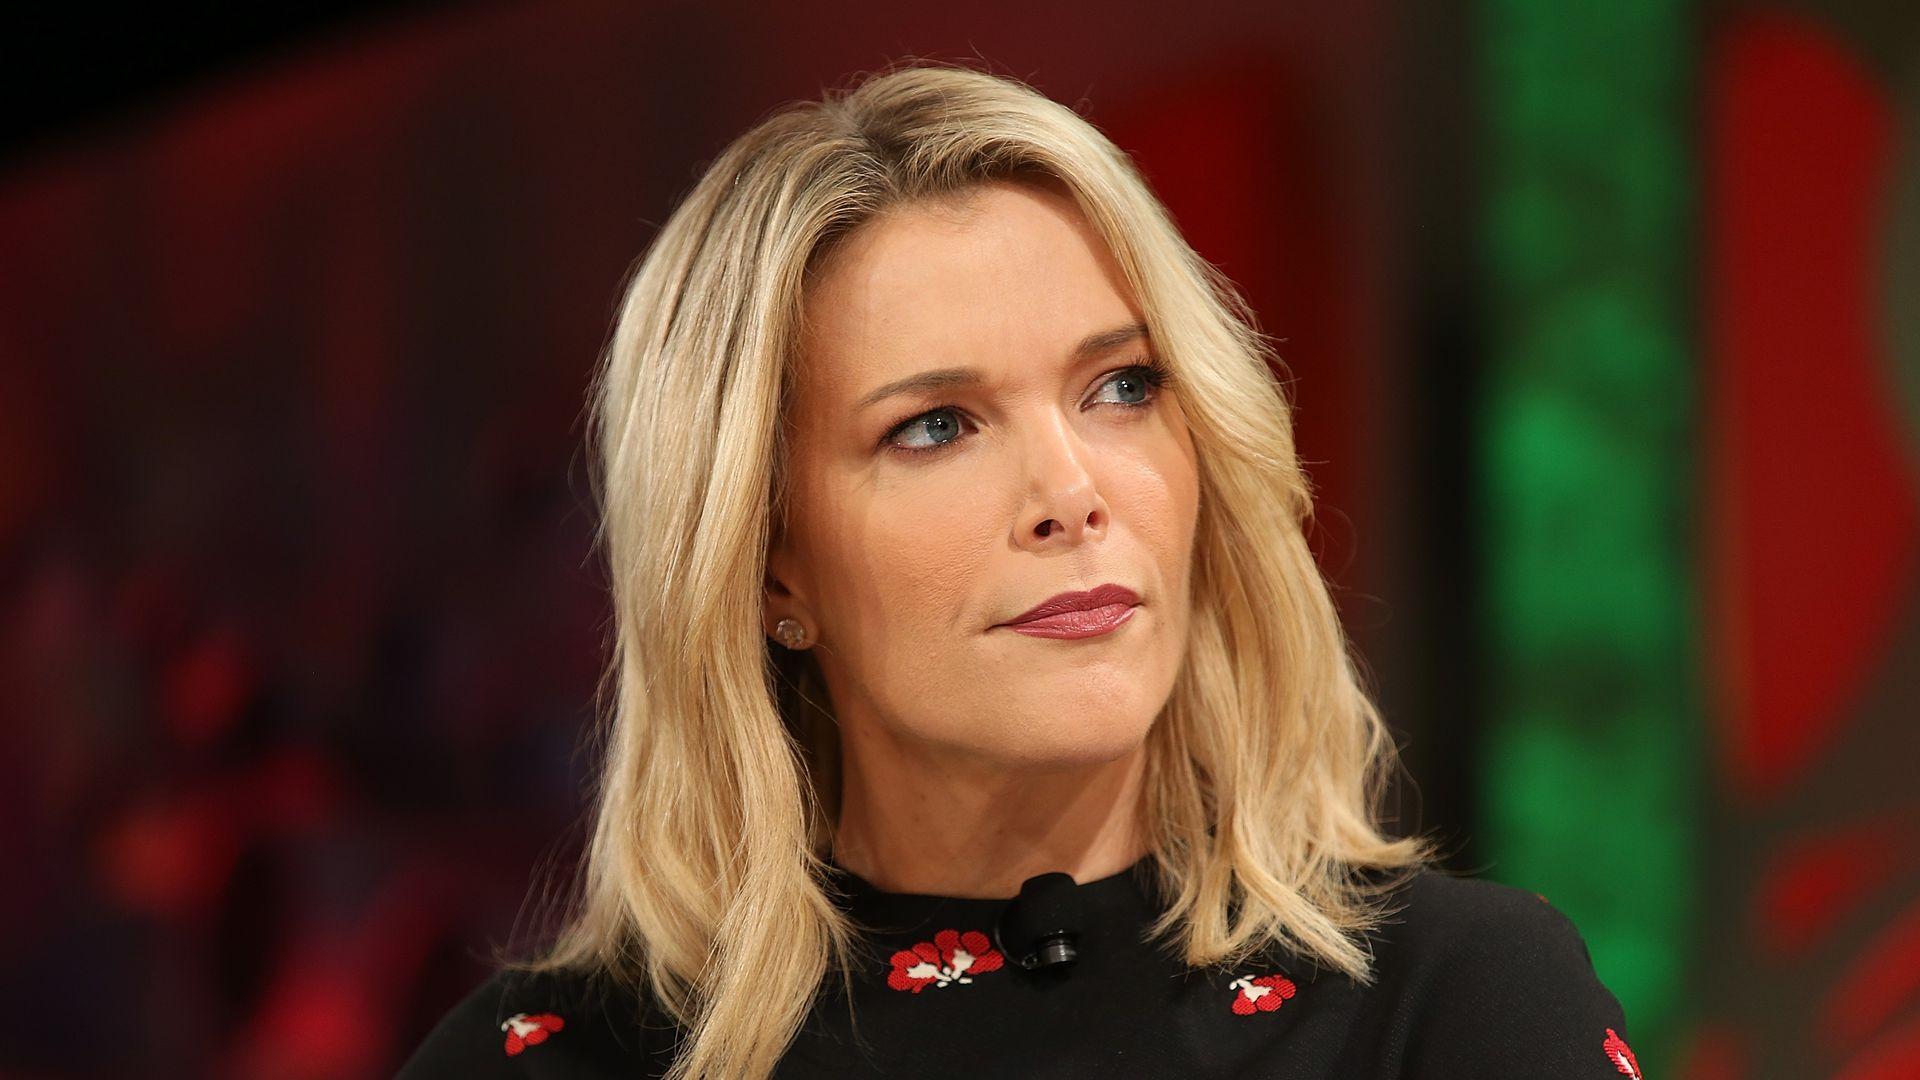 Today show colleagues sound off on Megyn Kelly's blackface comments